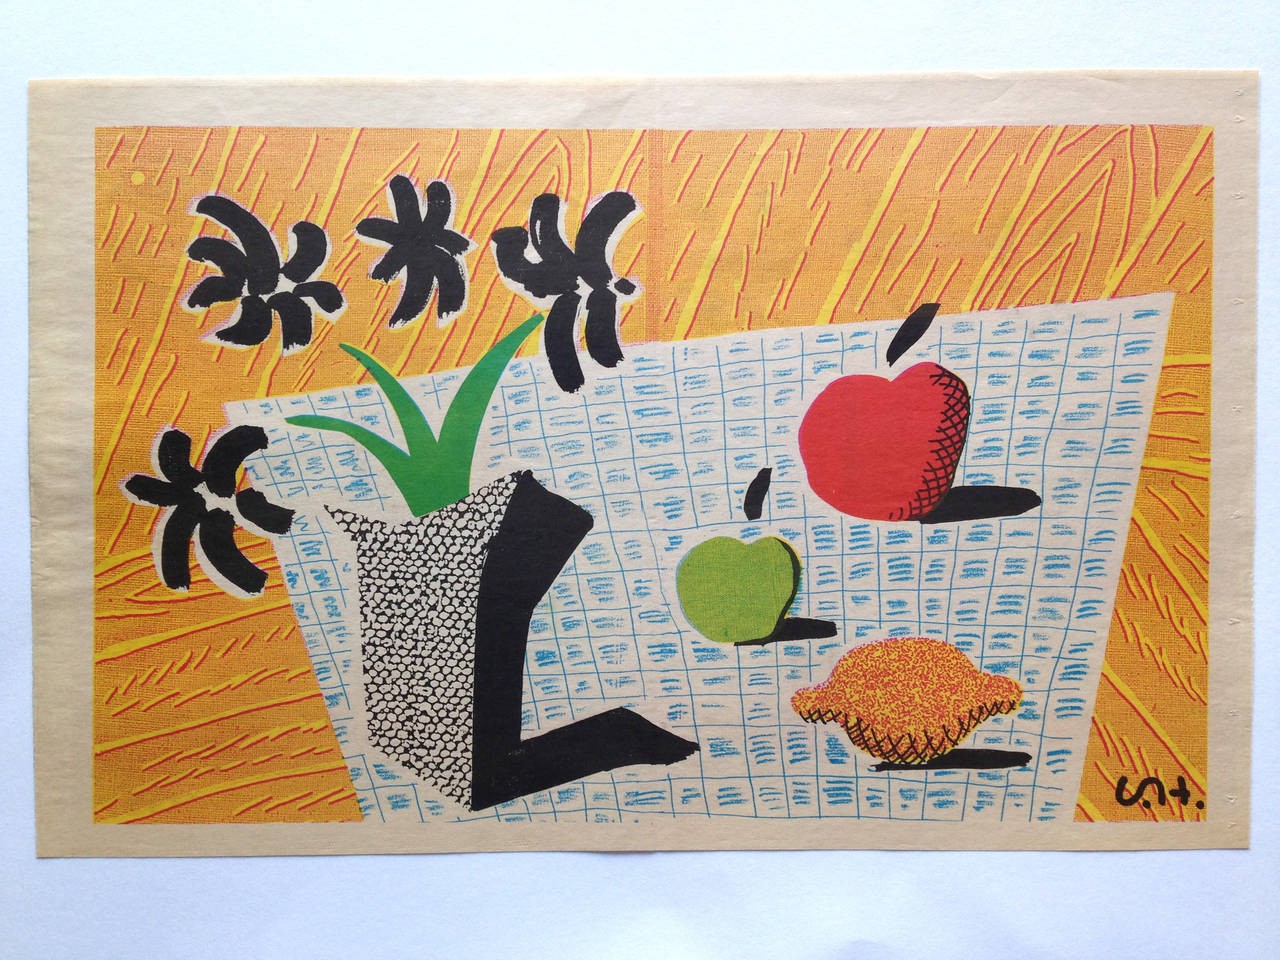 Two Apples, One Lemon and Four Flowers - Print by David Hockney